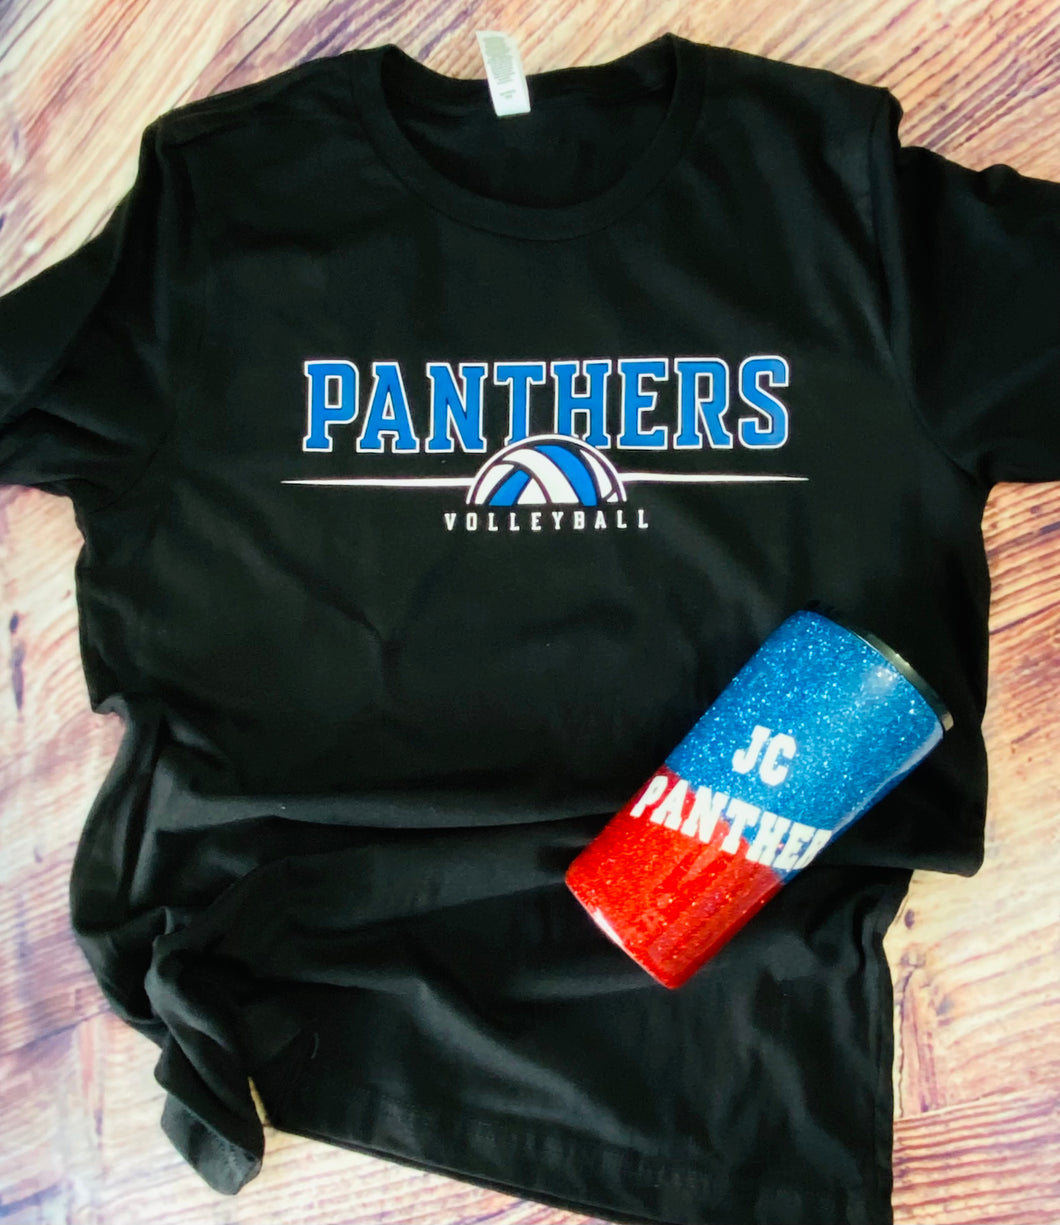 Panthers Volleyball graphic tee. - Mavictoria Designs Hot Press Express